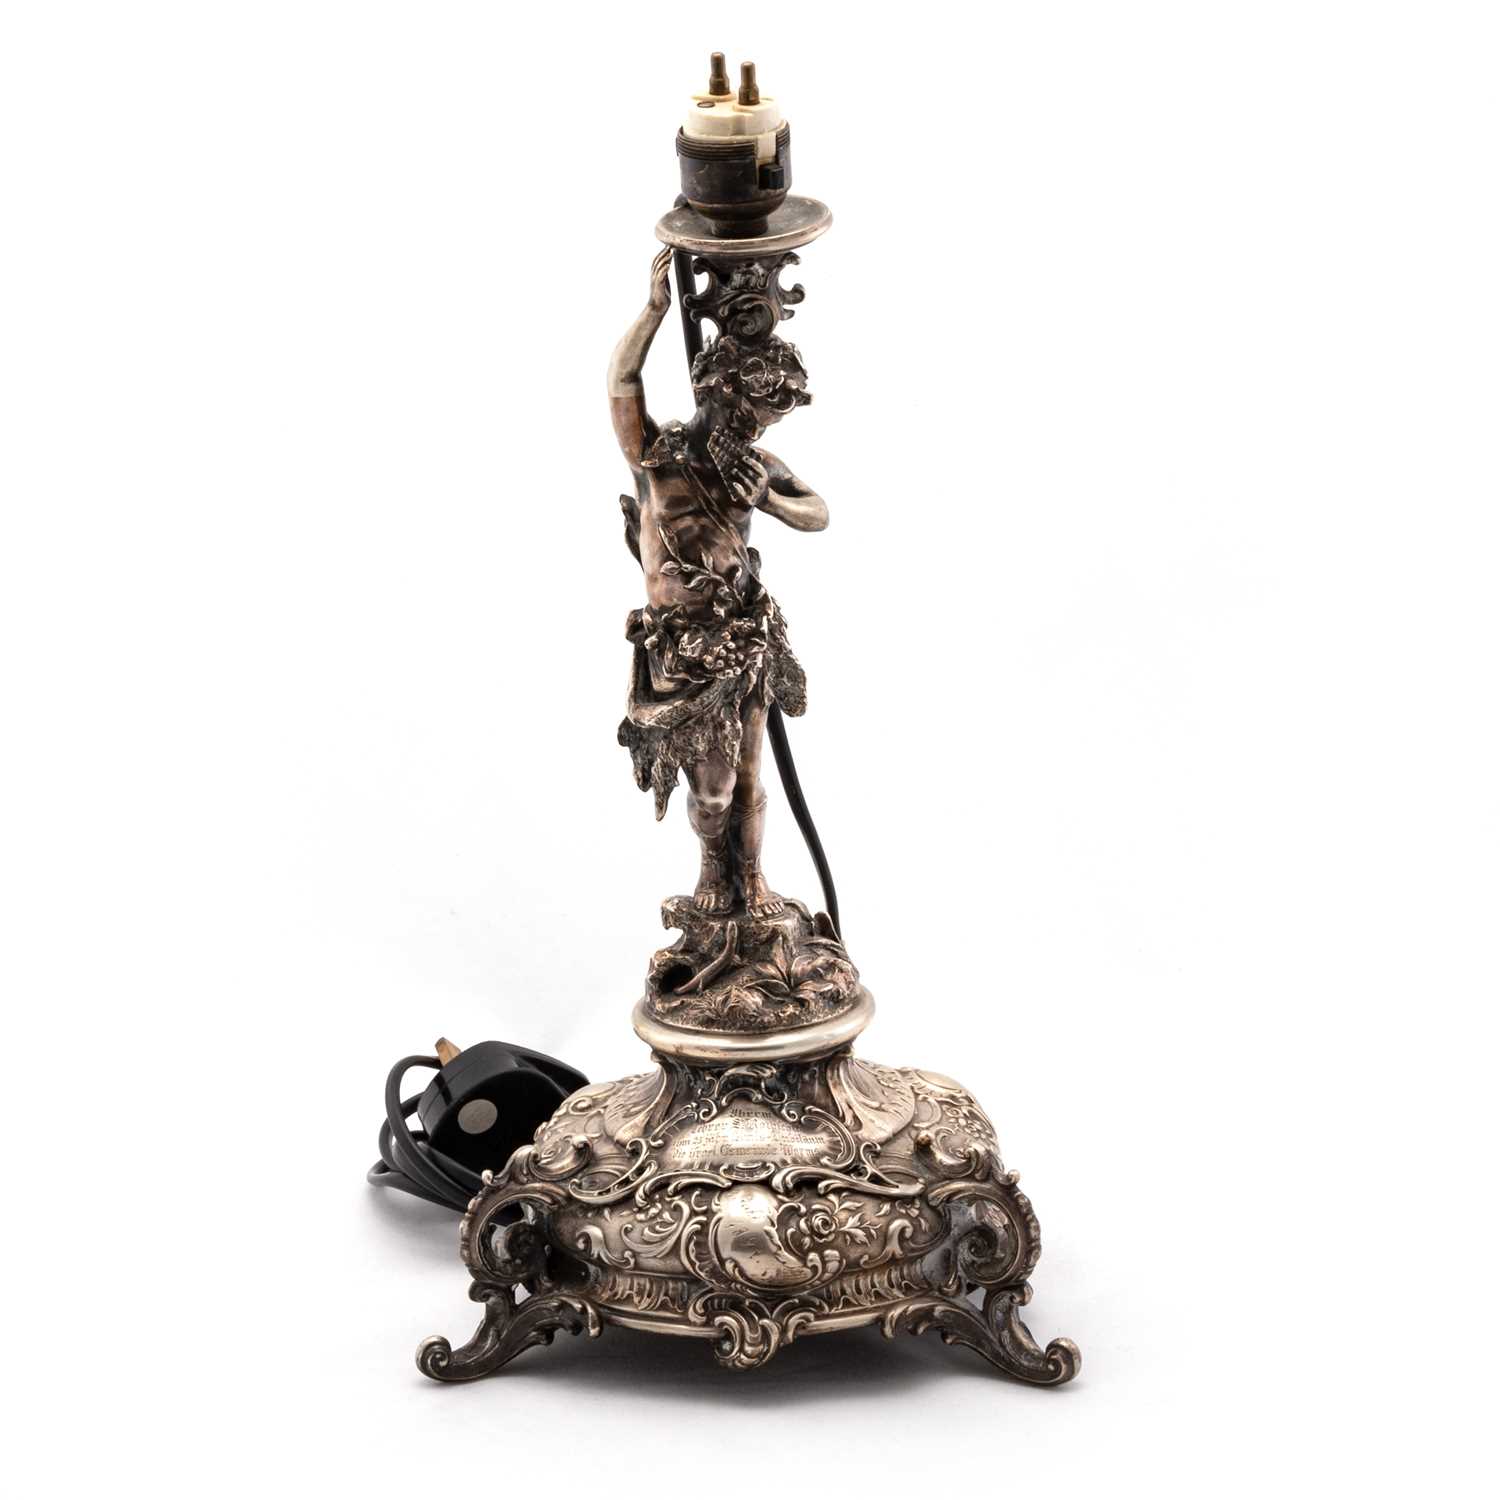 A GERMAN SILVER FIGURAL TABLE LAMP, LATE 19TH CENTURY